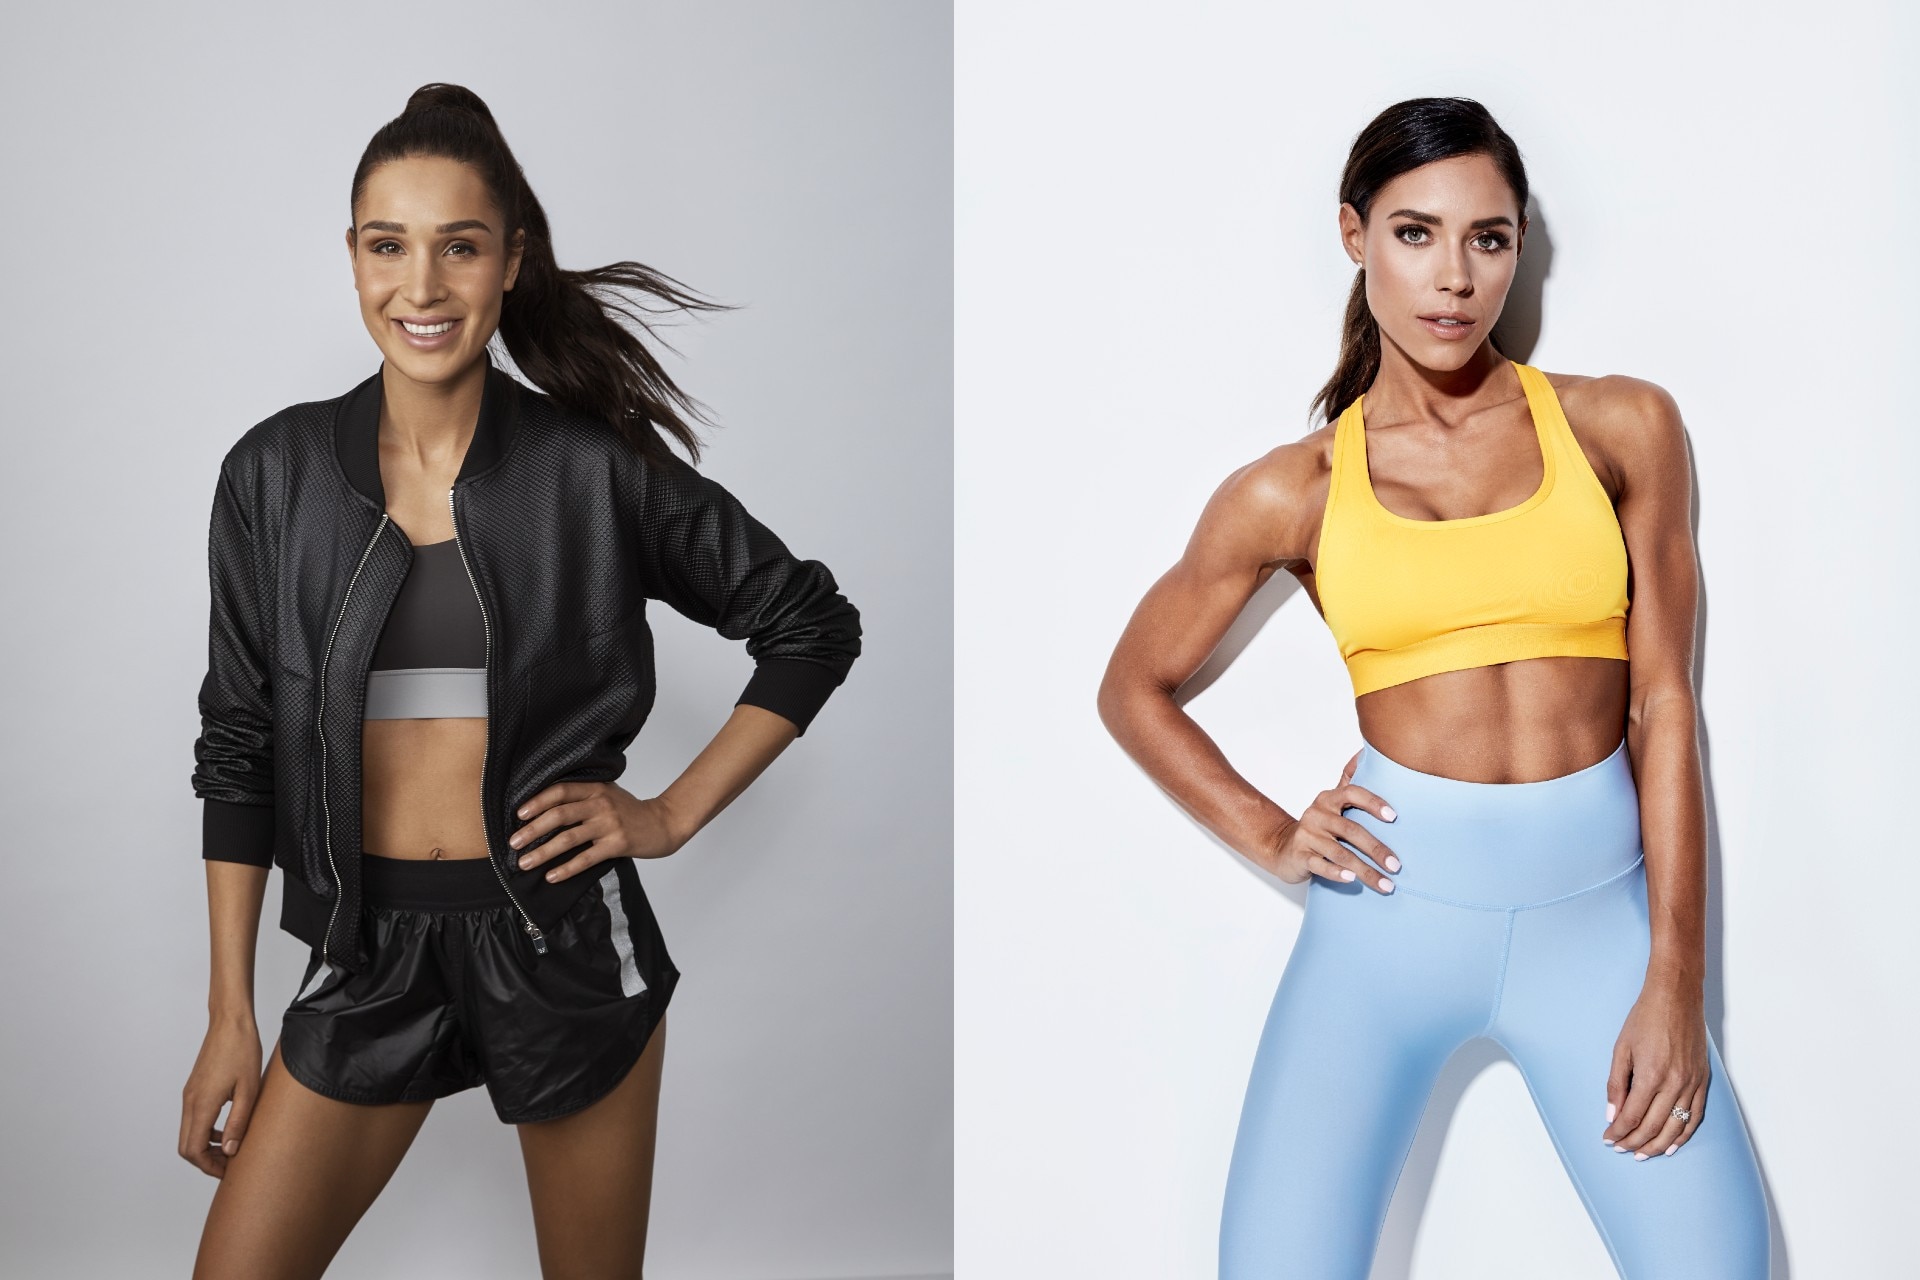 Fitness trainers Kayla Itsines and Kelsey Wells on the secret to